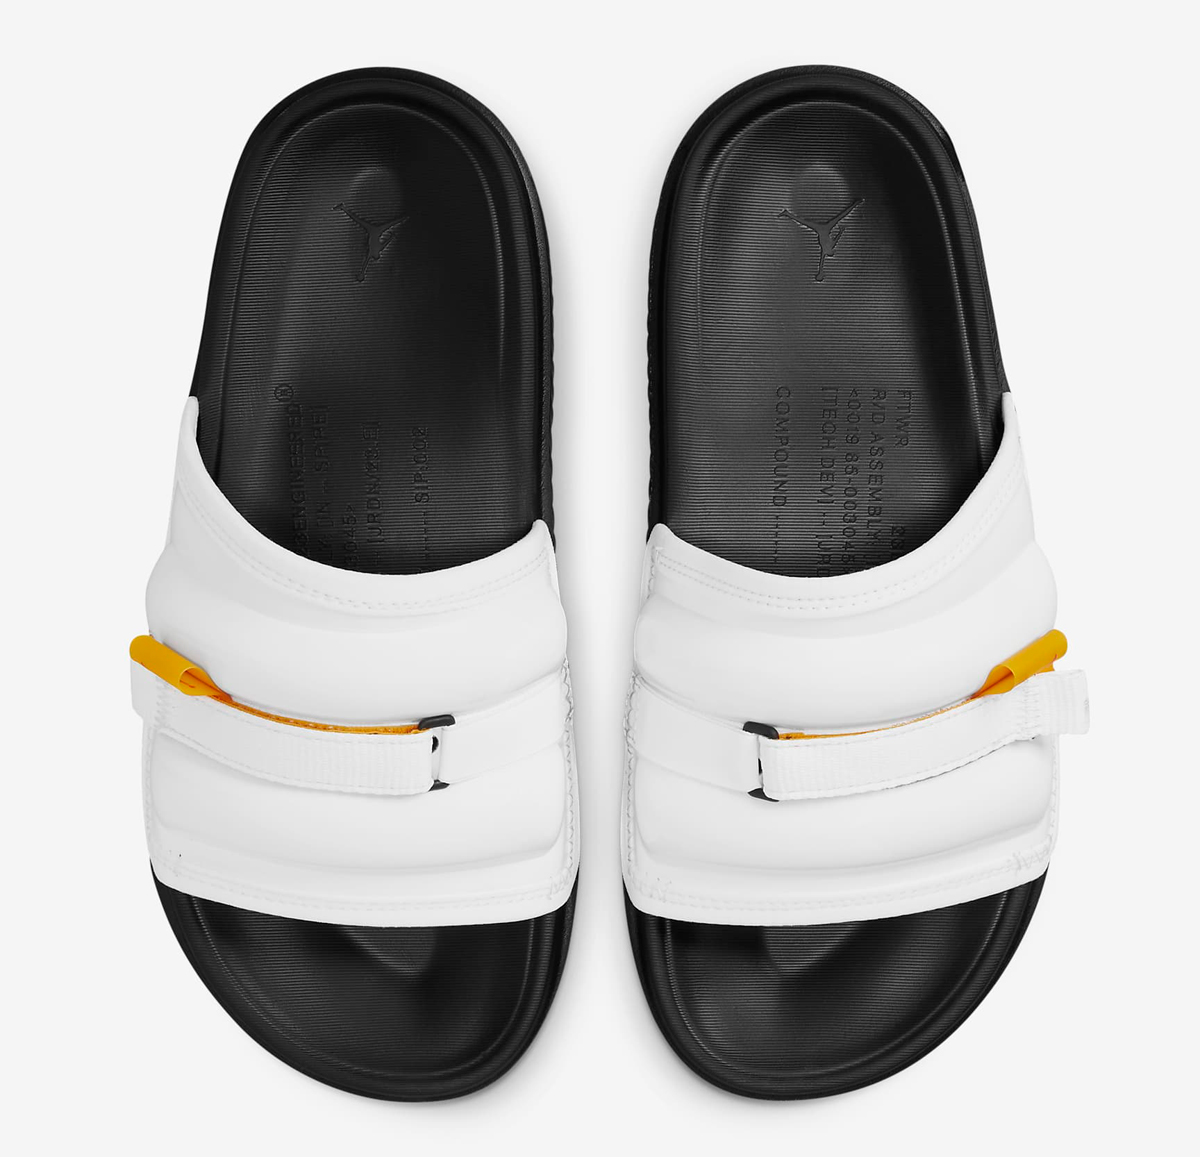 jordan-super-play-slides-white-black-taxi-fire-red-release-date-3